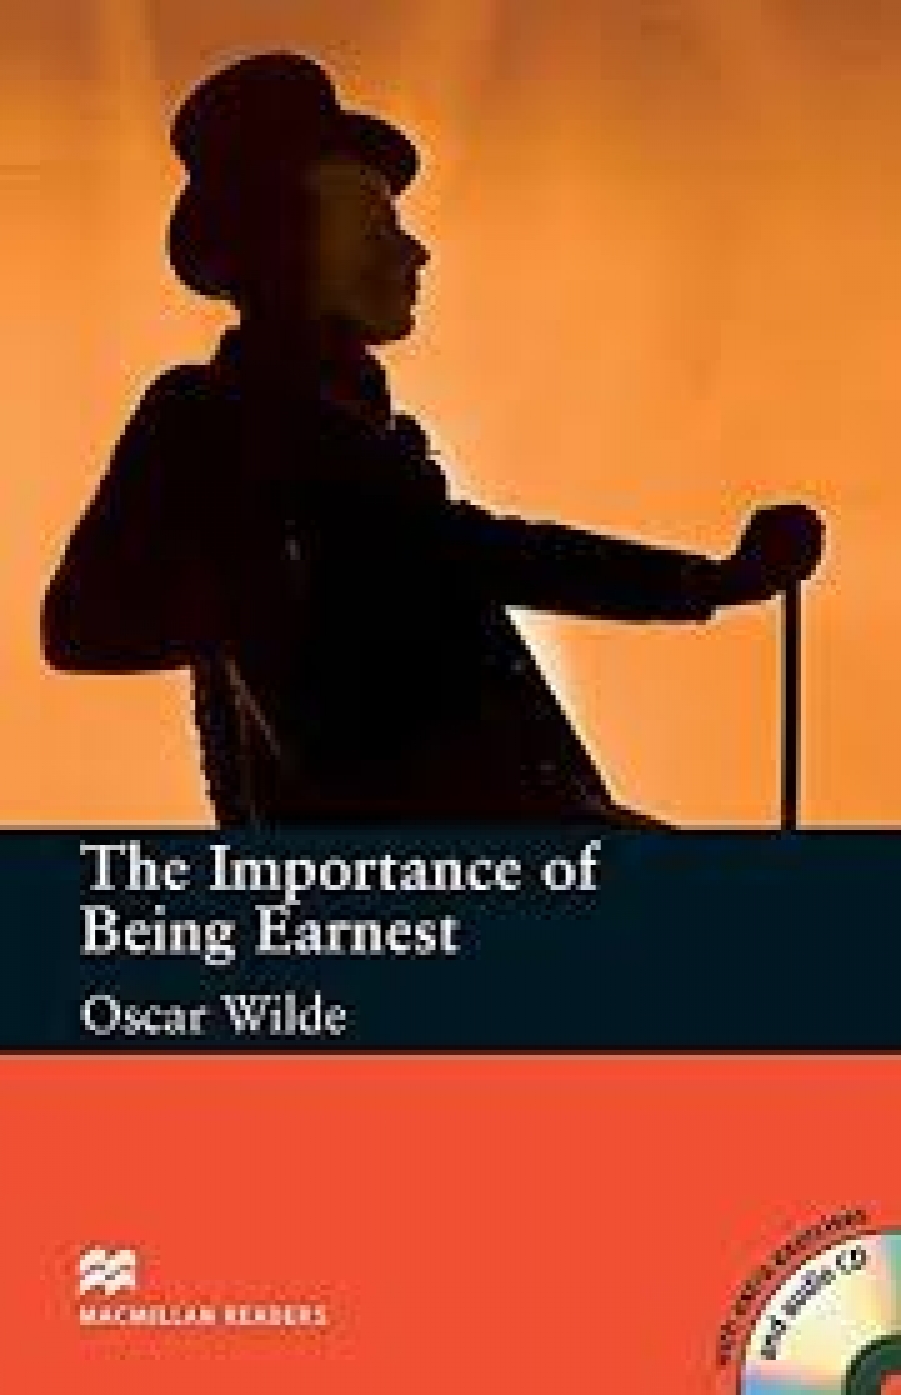 Oscar Wilde The Importance of Being Earnest (with Audio CD) 